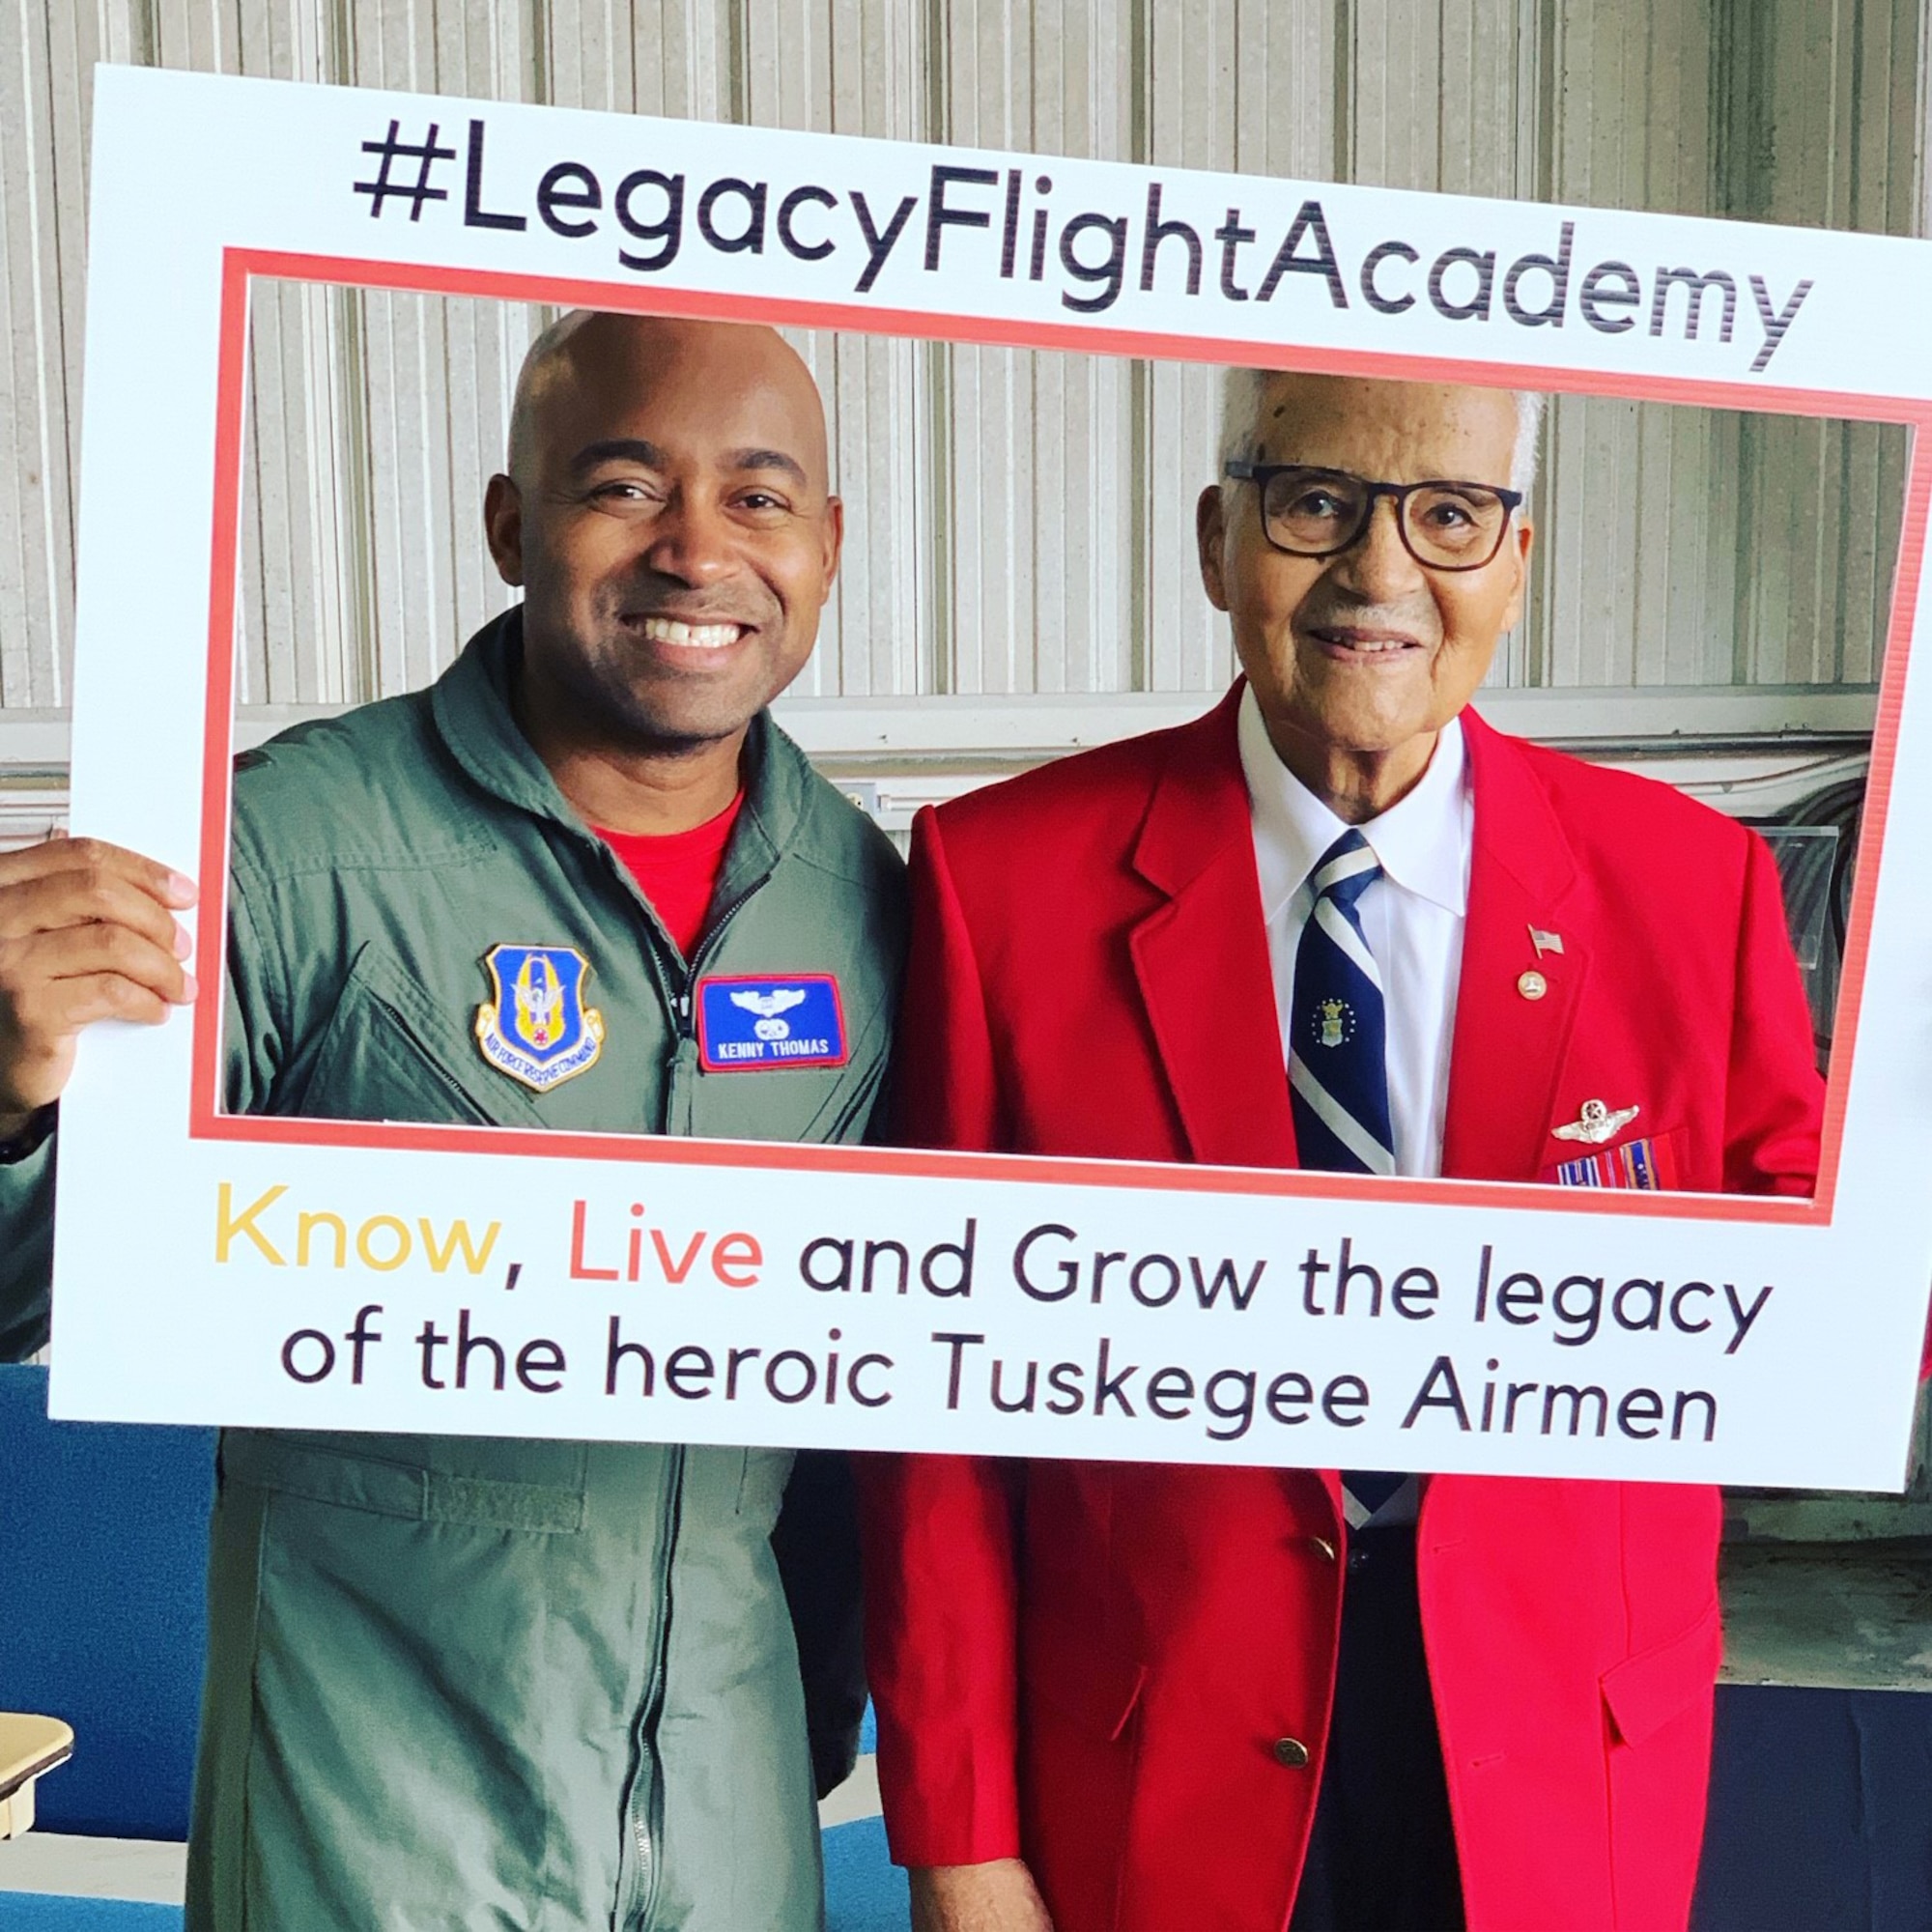 Brig. Gen. Charles McGee, an original Tuskegee Airmen, poses with Maj. Kenneth Thomas, a navigator with the 94th Airlift Wing, Dobbins Air Reserve Base, Georgia, at a Legacy Flight Academy event.